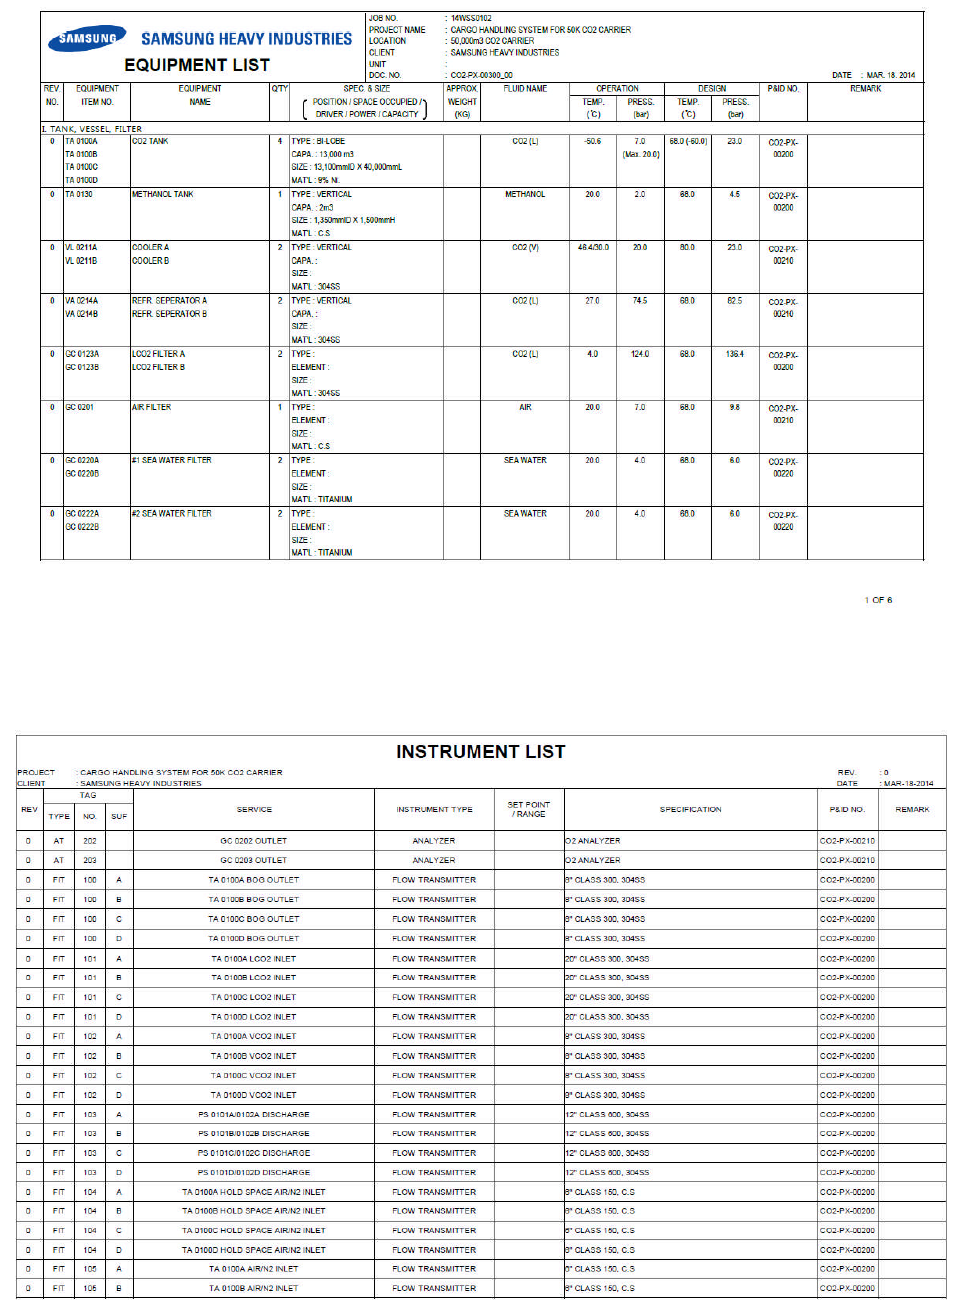 Equipment and Instrument list